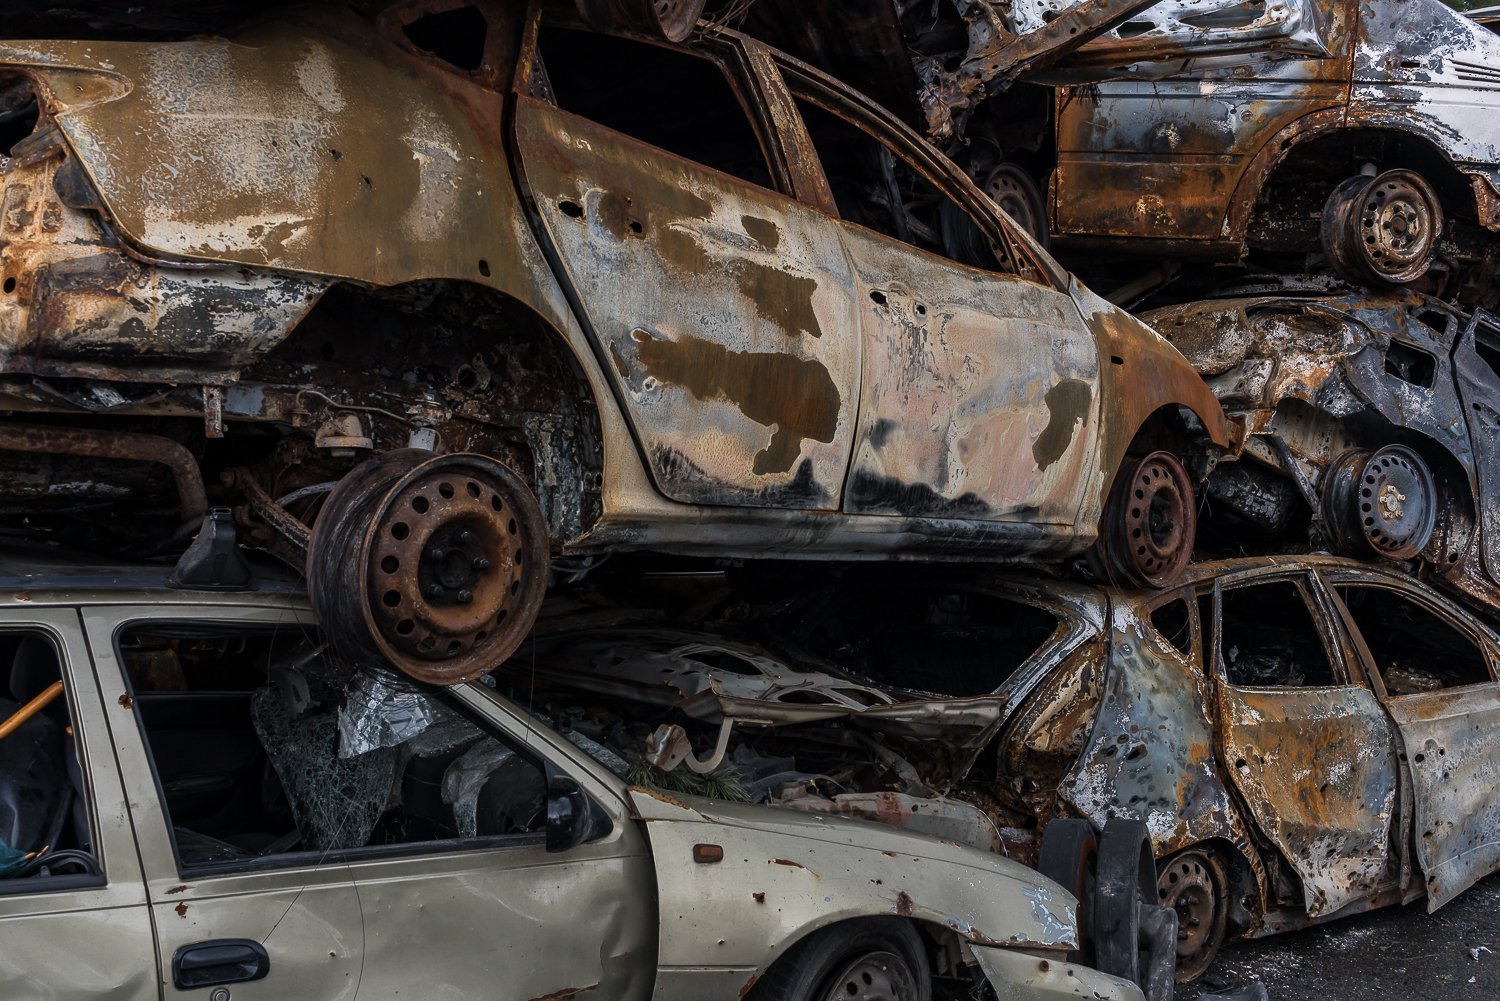  Cars destroyed during fighting between the Ukrianian and Russian militaries are heaped in a parking lot after being cleared from main roads on Thursday, April 21, 2022 in Irpin, Ukraine. 